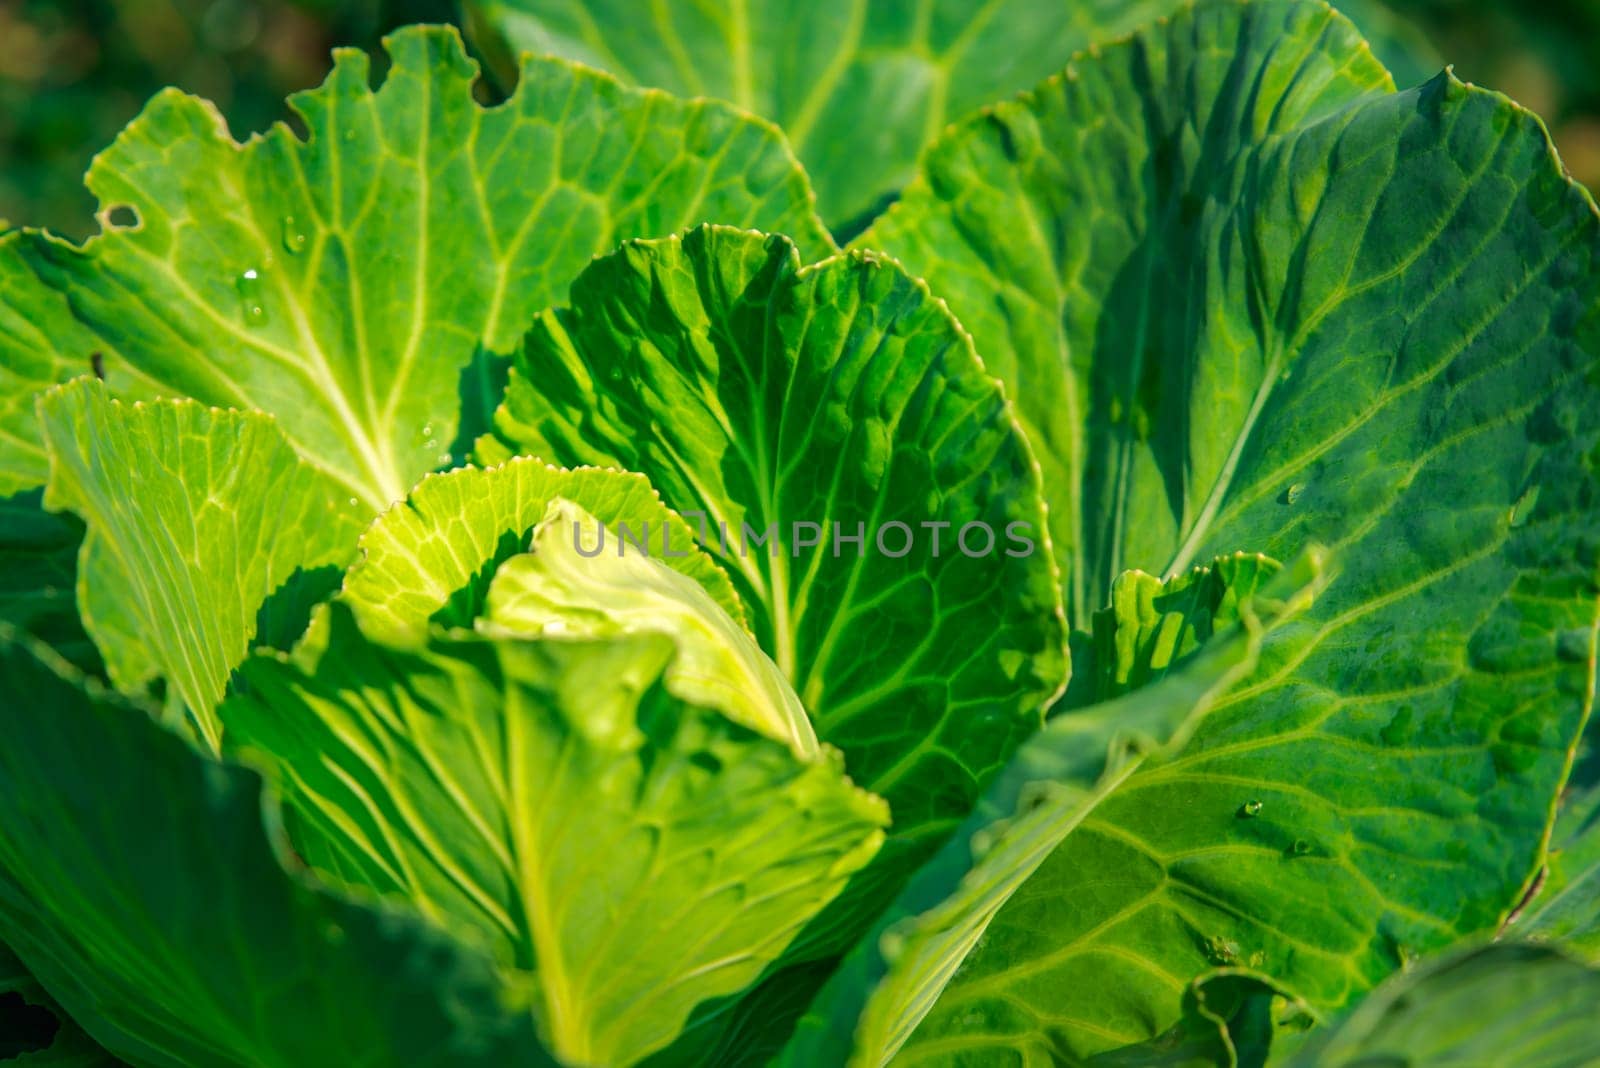 Greenery background, green color of nature plant and leaf environment greenery concept